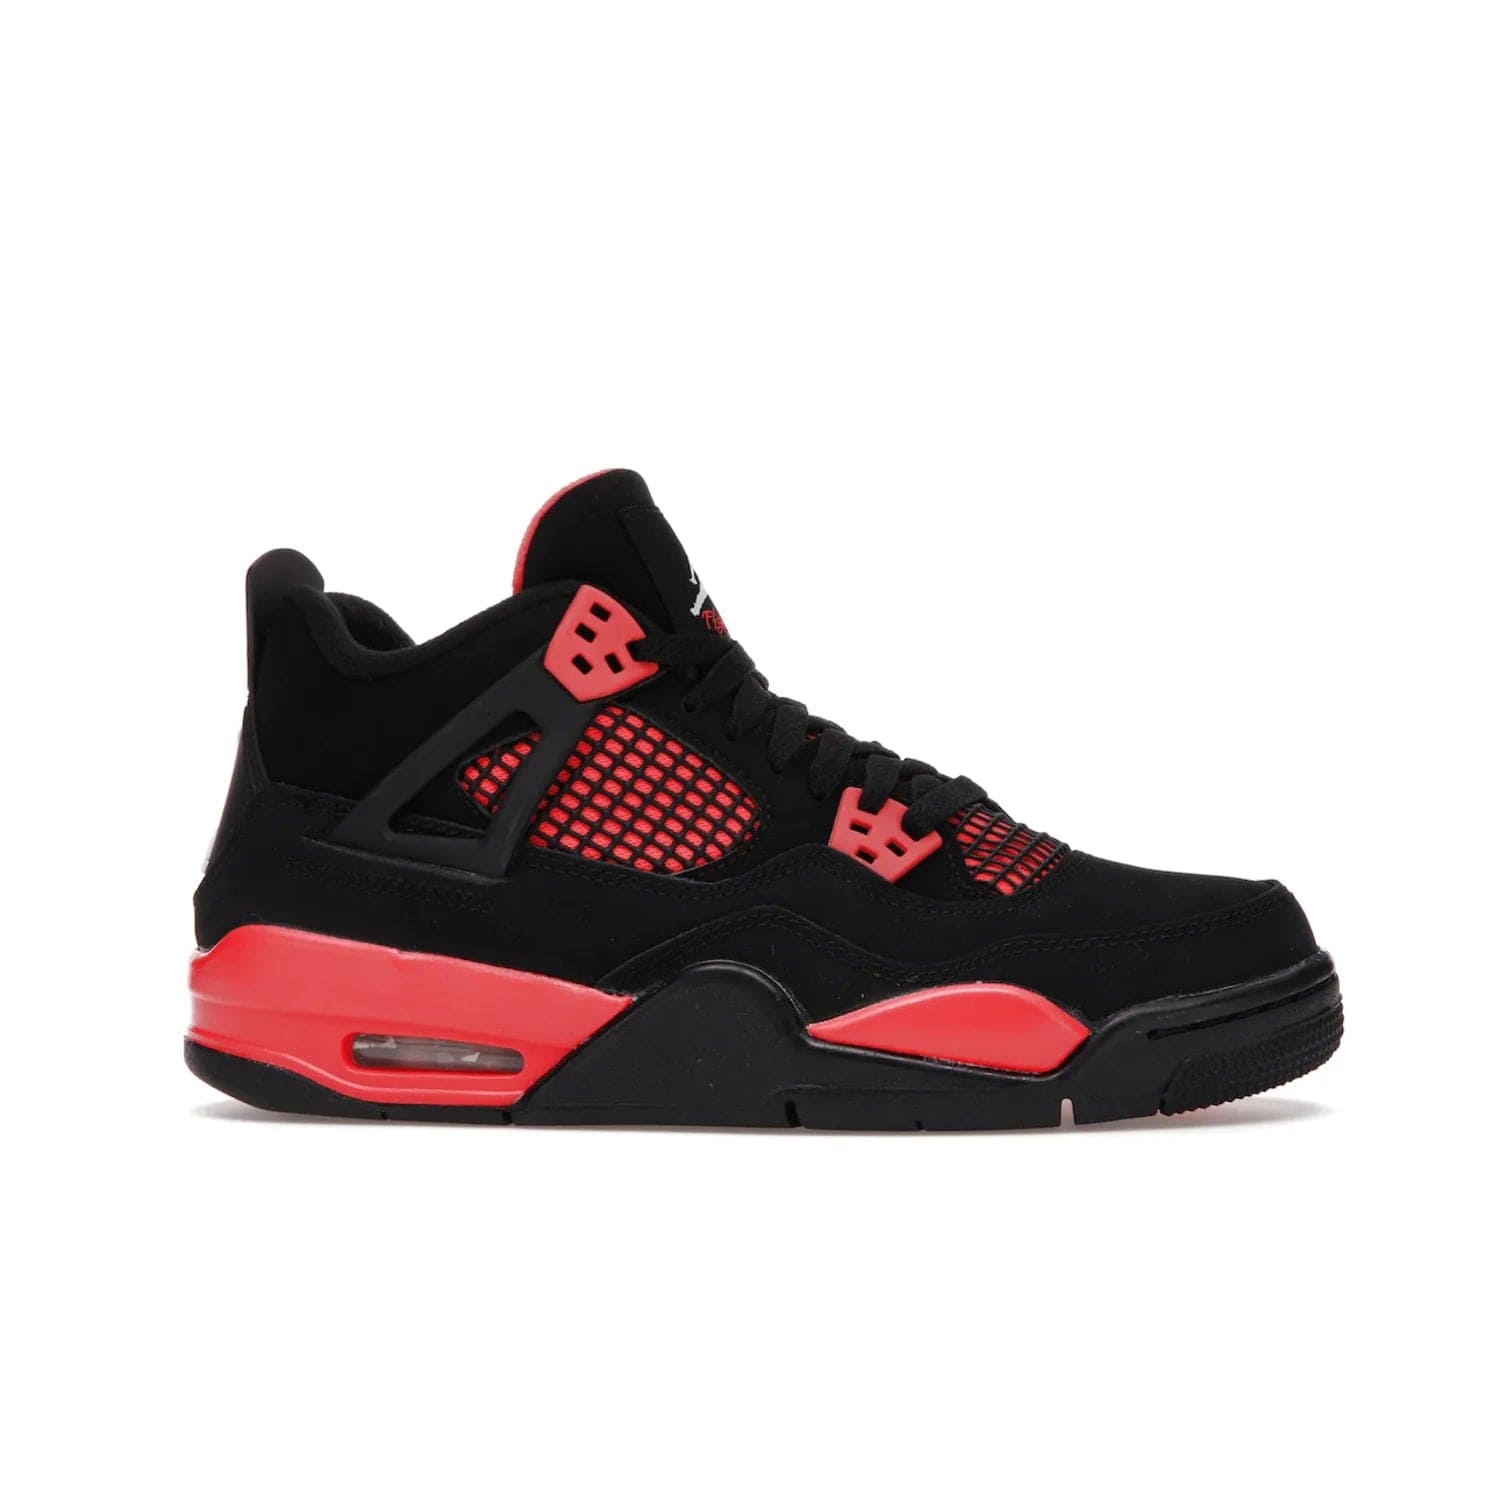 Jordan 4 Retro Red Thunder (GS) - Image 2 - Only at www.BallersClubKickz.com - The Air Jordan 4 Retro Red Thunder GS features a stylish black and crimson upper with a Jumpman logo. Athletic midsole with Air bubbles for cushioning and black rubber outsole with iconic motif complete this classic sneaker.